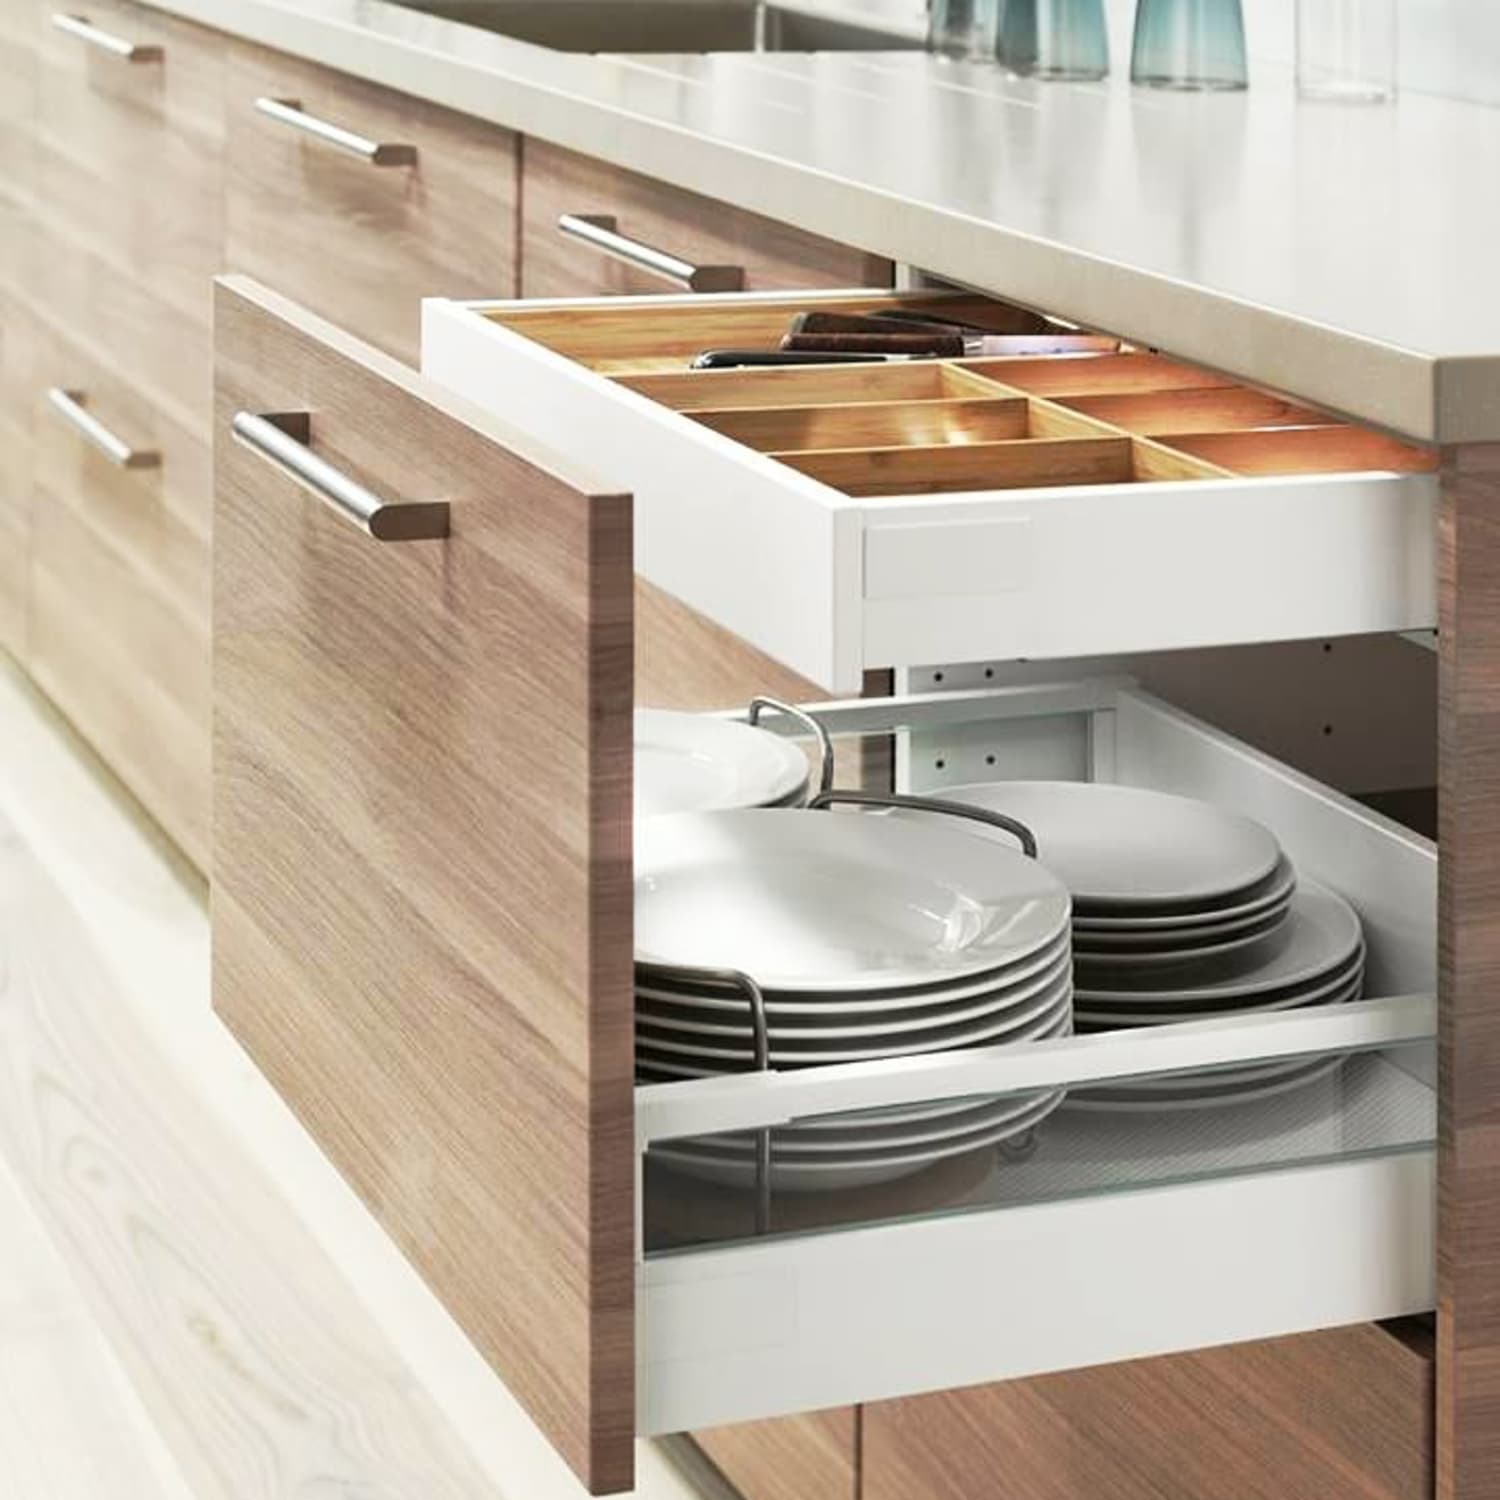 IKEA Is Totally Changing Their Kitchen Cabinet System. Here